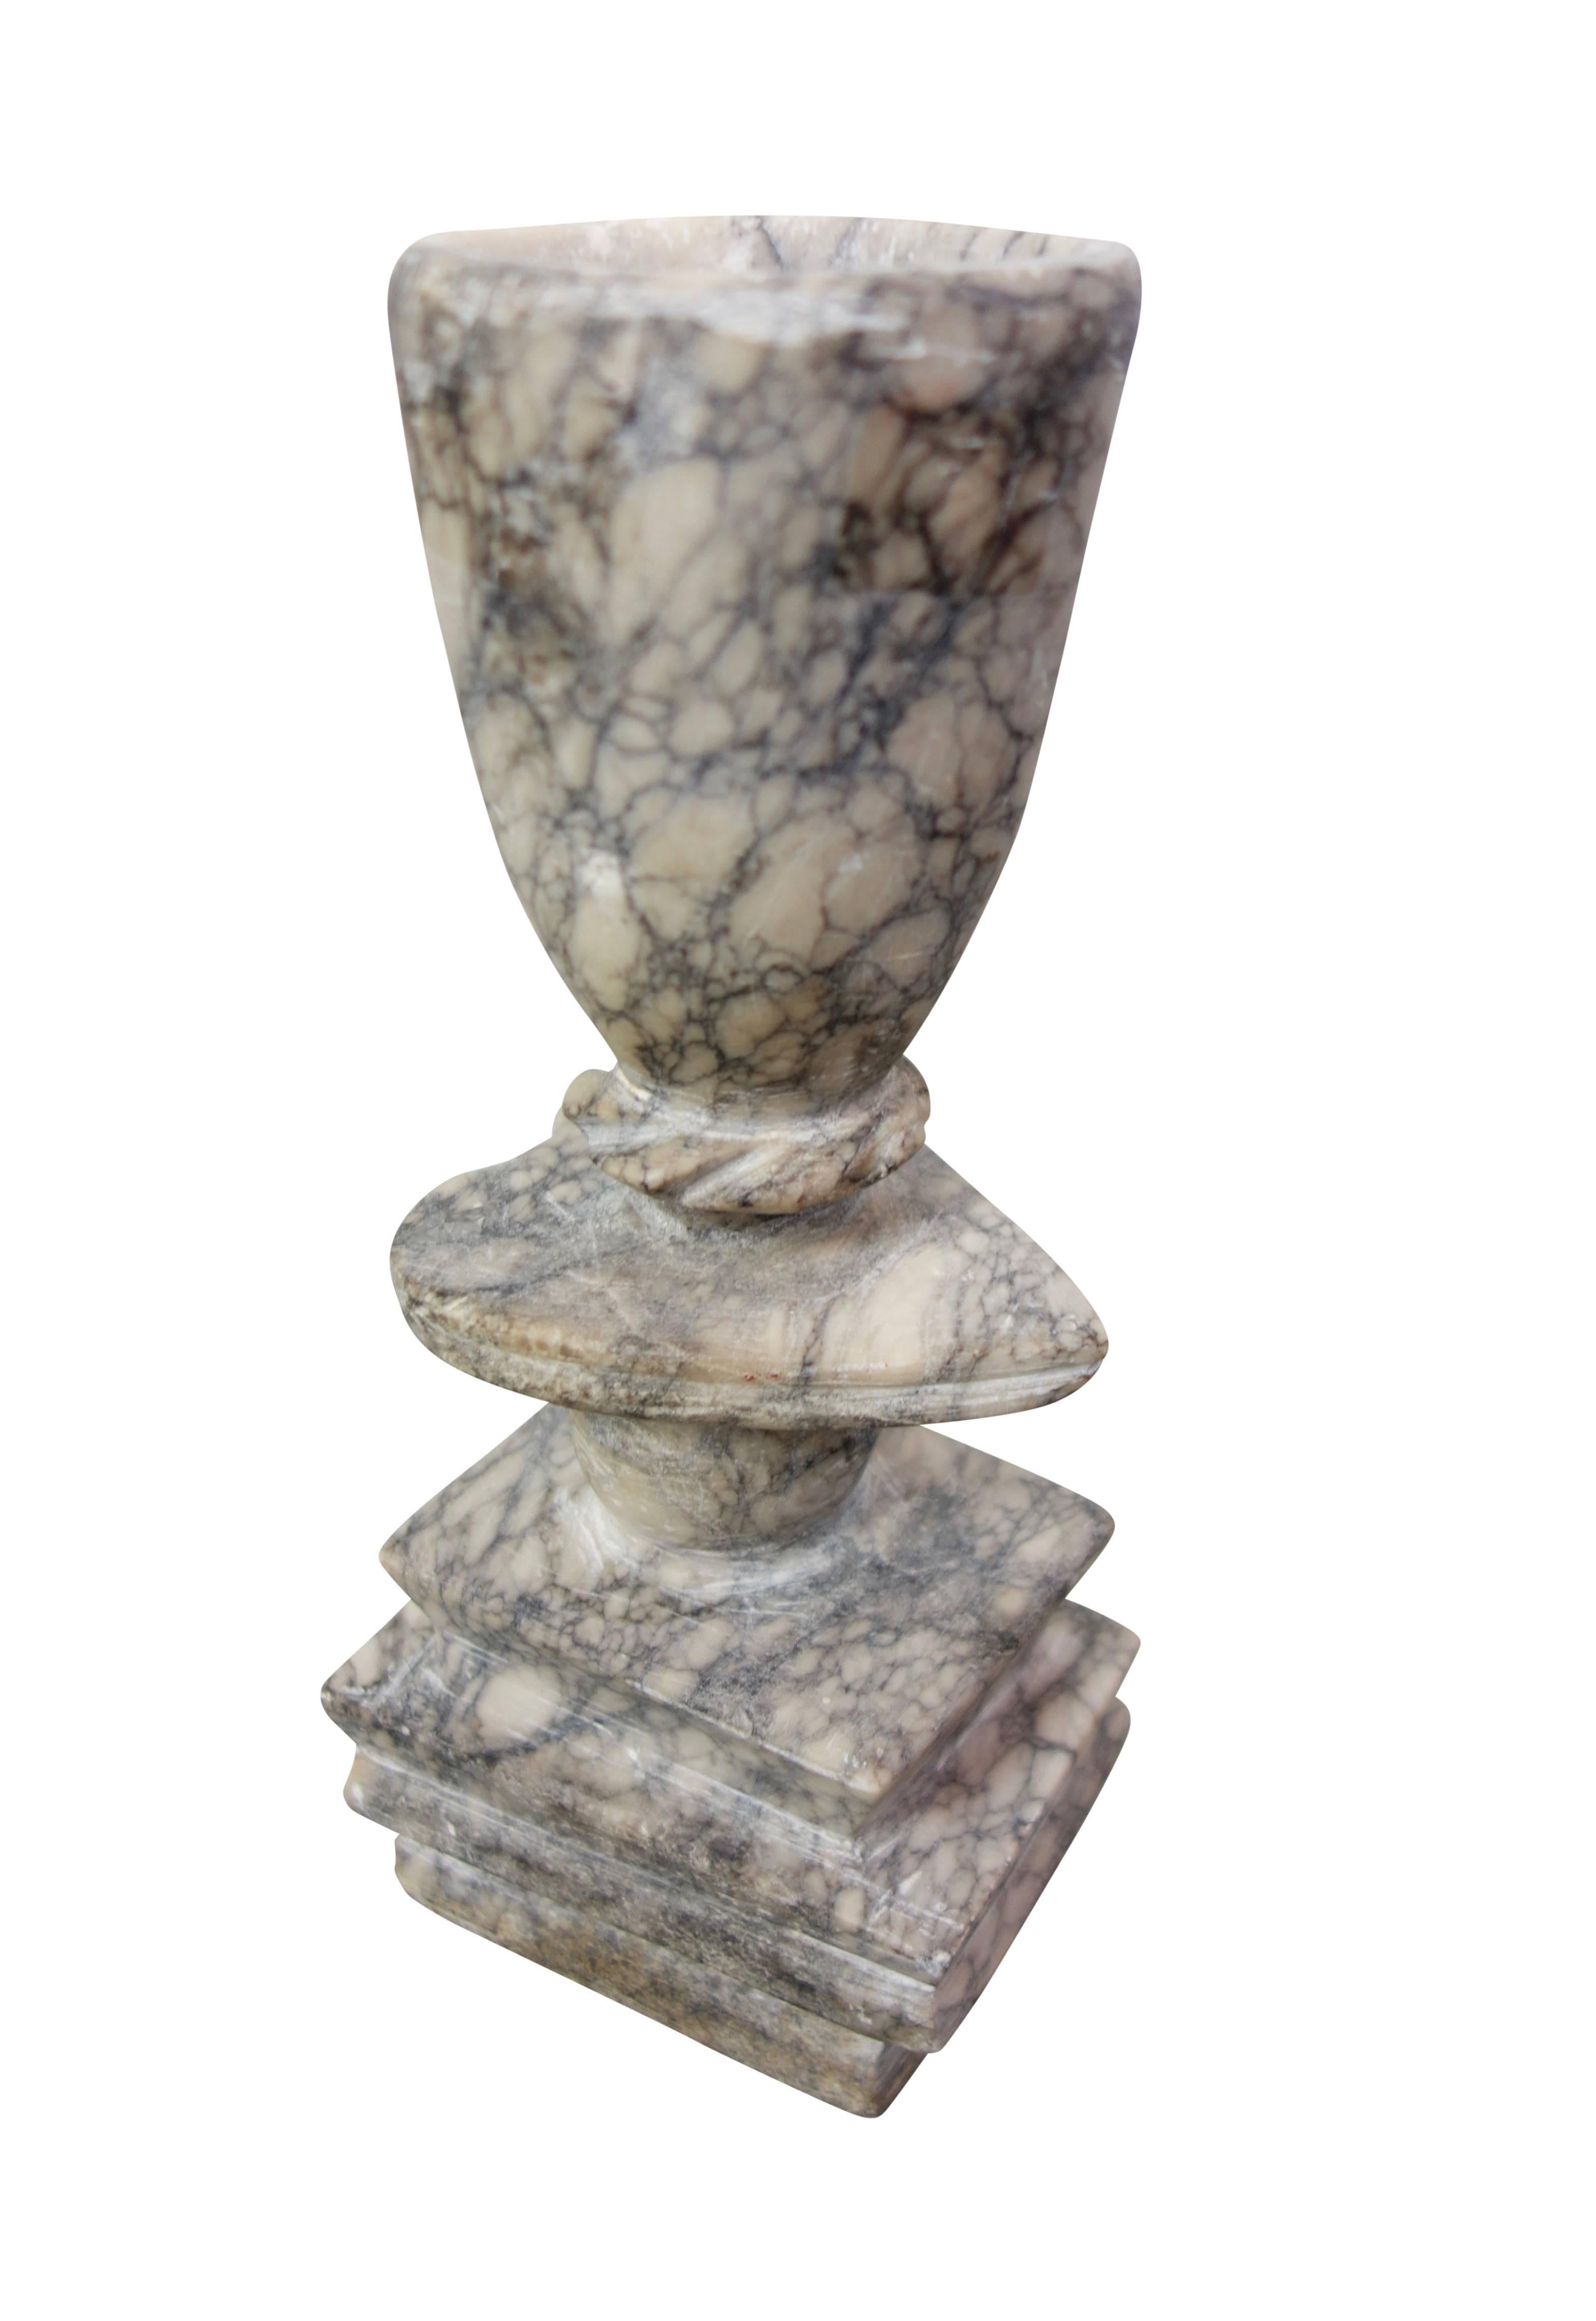 This is a lovely one of a kind hand chiseled marble goblet with a heart shaped stem, and a stack of books for the base. A perfect gift for a loved one.